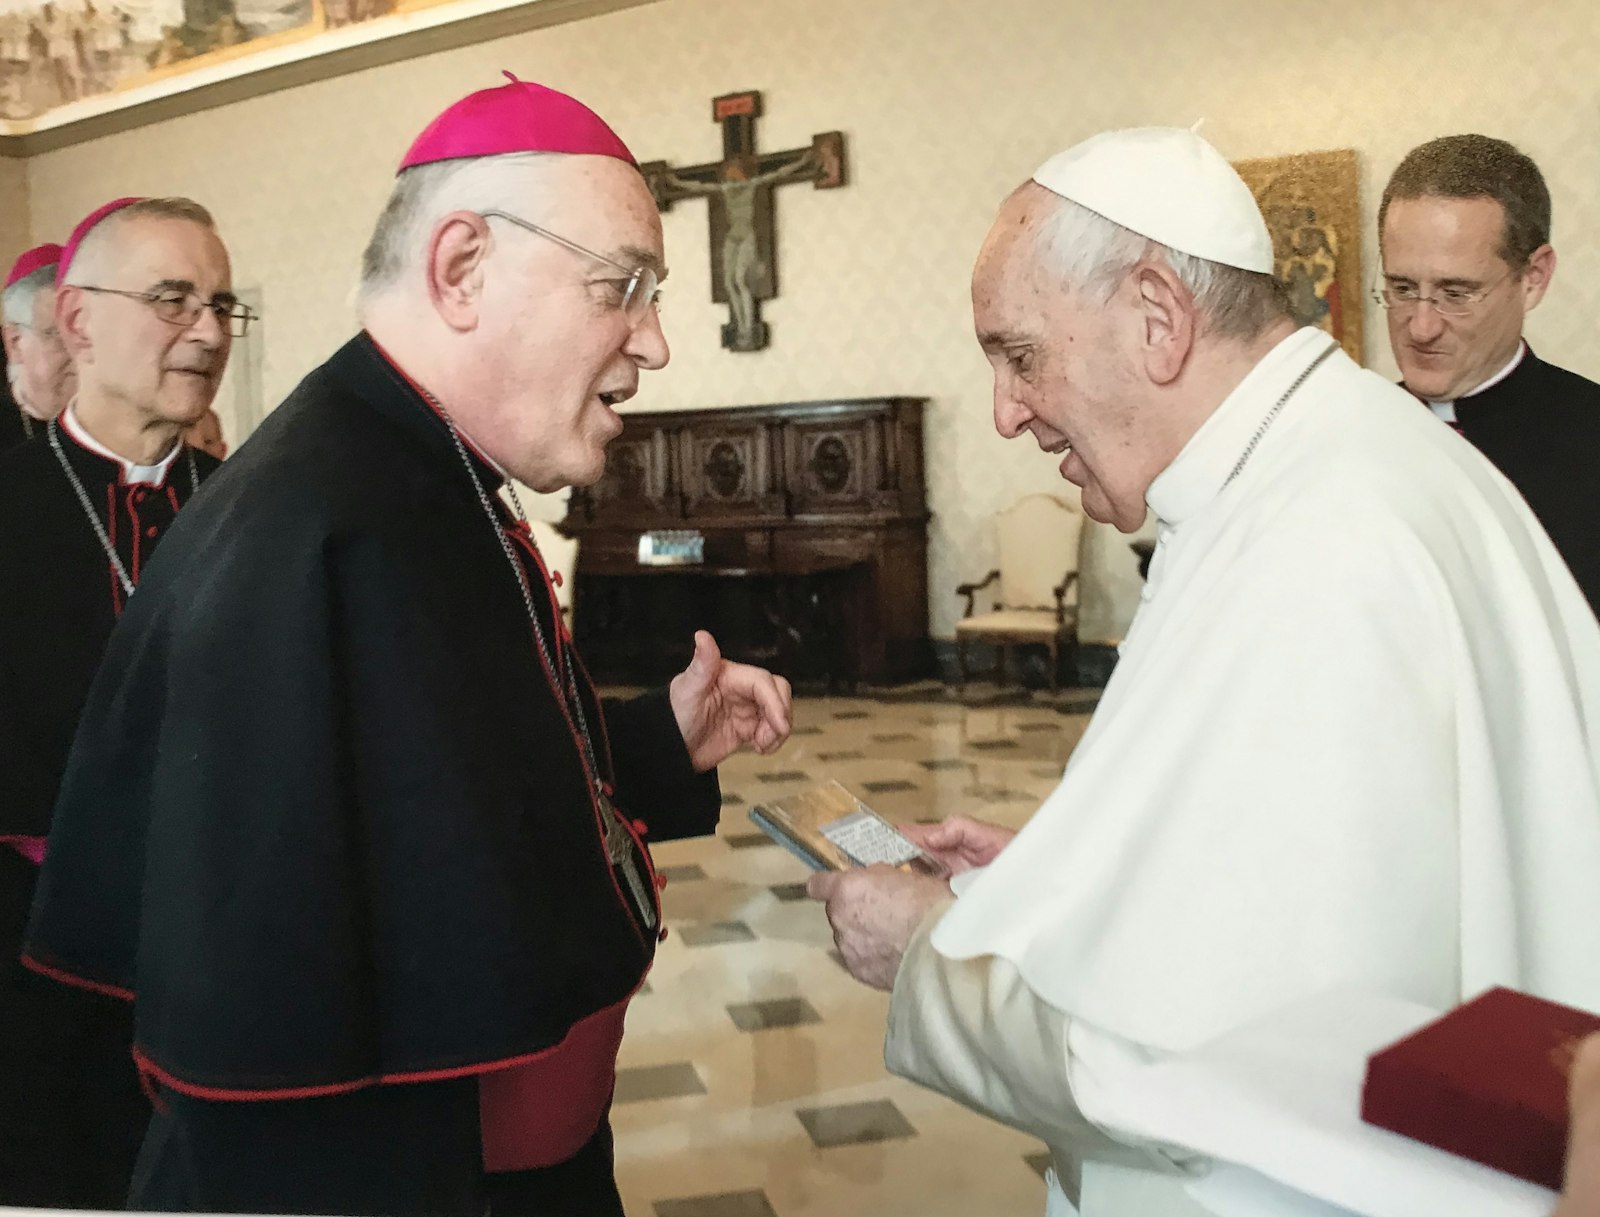 Detroit Auxiliary Bishop Donald F. Hanchon greets Pope Francis as part of the U.S. bishops' "ad limina" visits to Rome in 2019. On Oct. 9, Bishop Hanchon turned 75 years old, the age at which bishops are required to offer their resignations to the Holy Father. (Photos courtesy of Bishop Donald F. Hanchon)